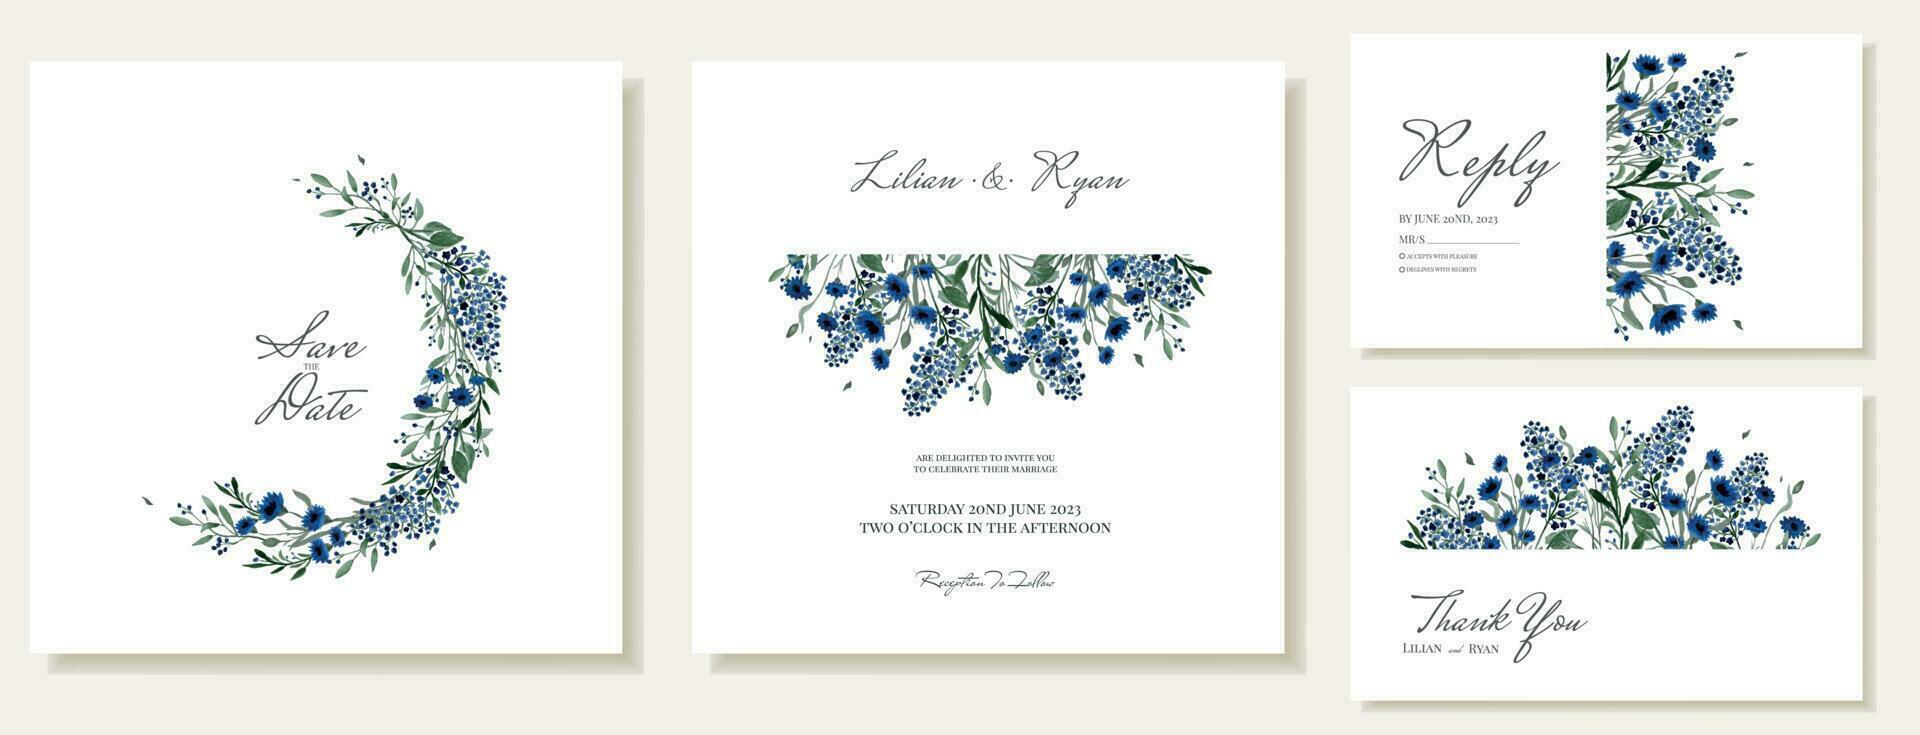 Square wedding invitations and thank you cards with hand-drawn ...